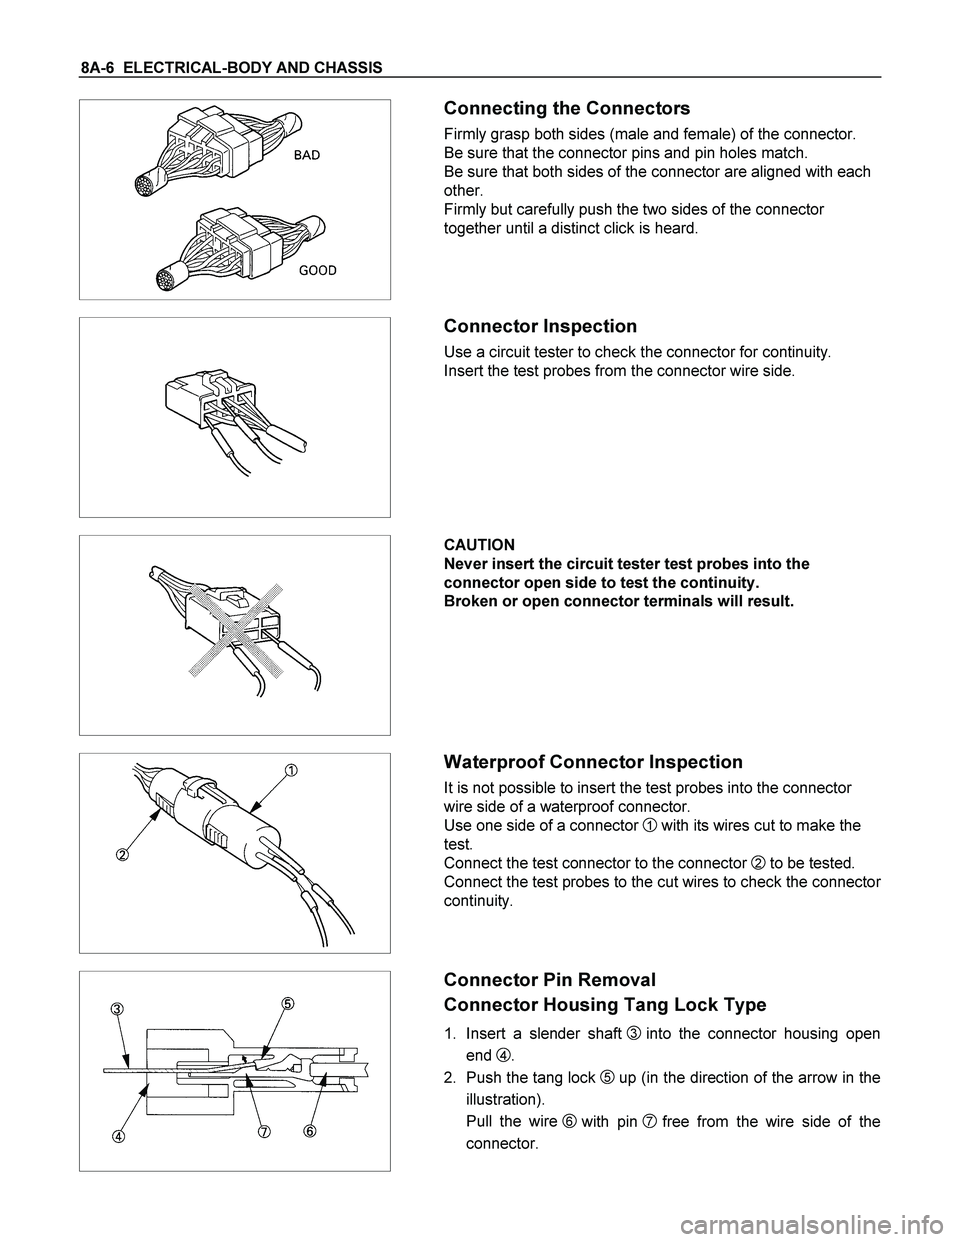 ISUZU TF SERIES 2004  Workshop Manual 8A-6  ELECTRICAL-BODY AND CHASSIS 
 
  
 Connecting the Connectors 
Firmly grasp both sides (male and female) of the connector. 
Be sure that the connector pins and pin holes match. 
Be sure that both